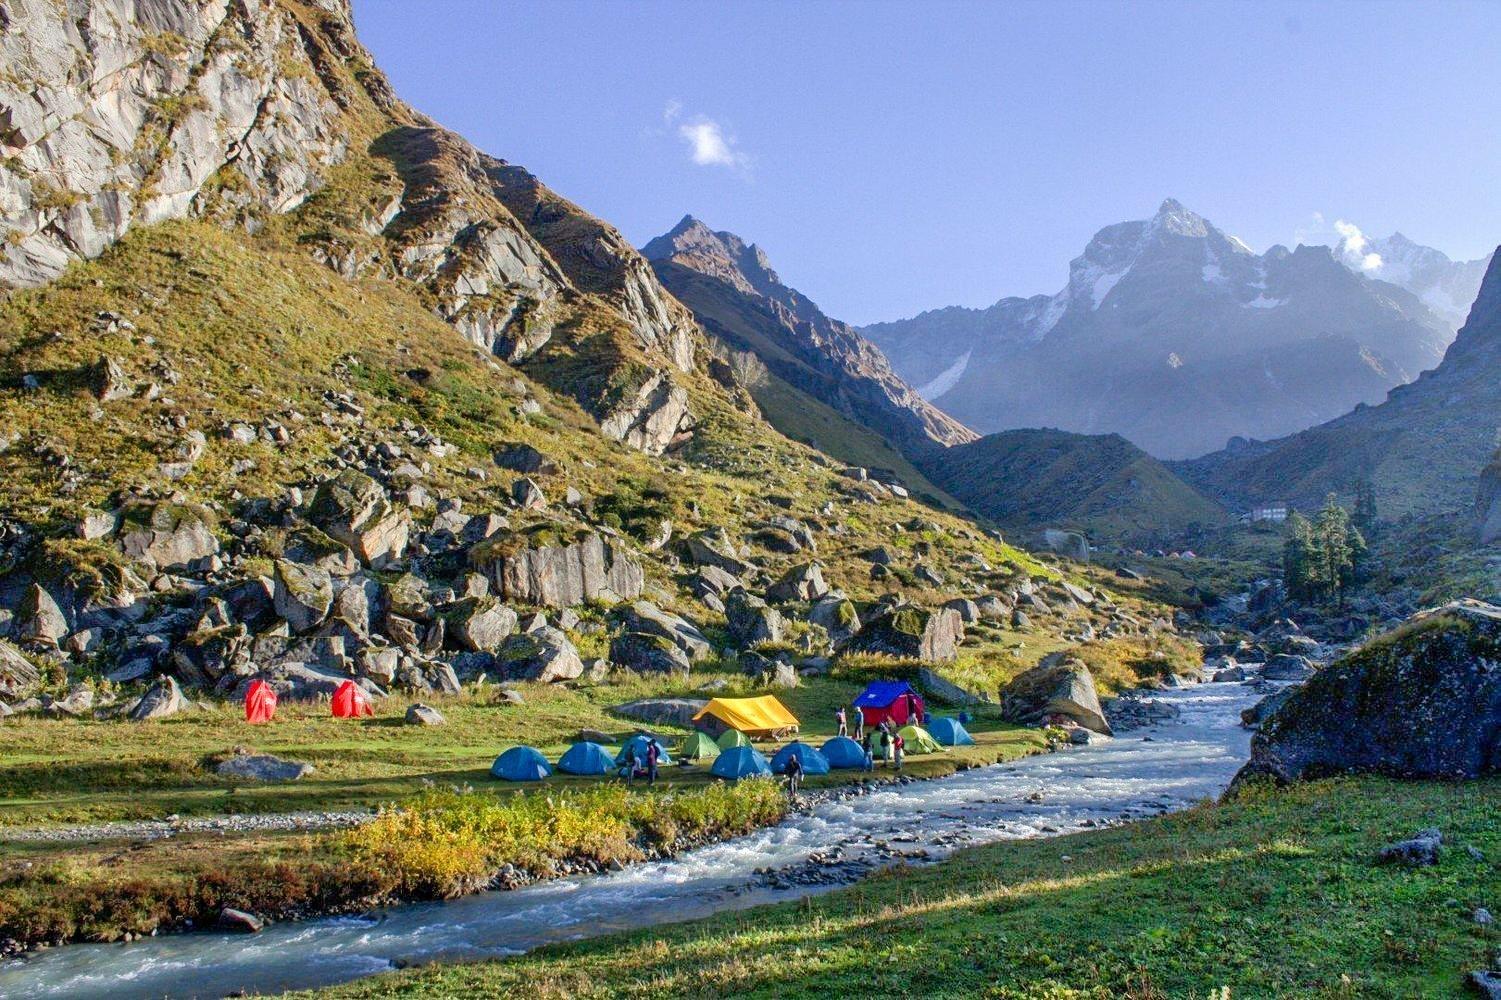 The Har Ki Dun Trek attracts newcomers in the droves: enticed by its stunning scenery.